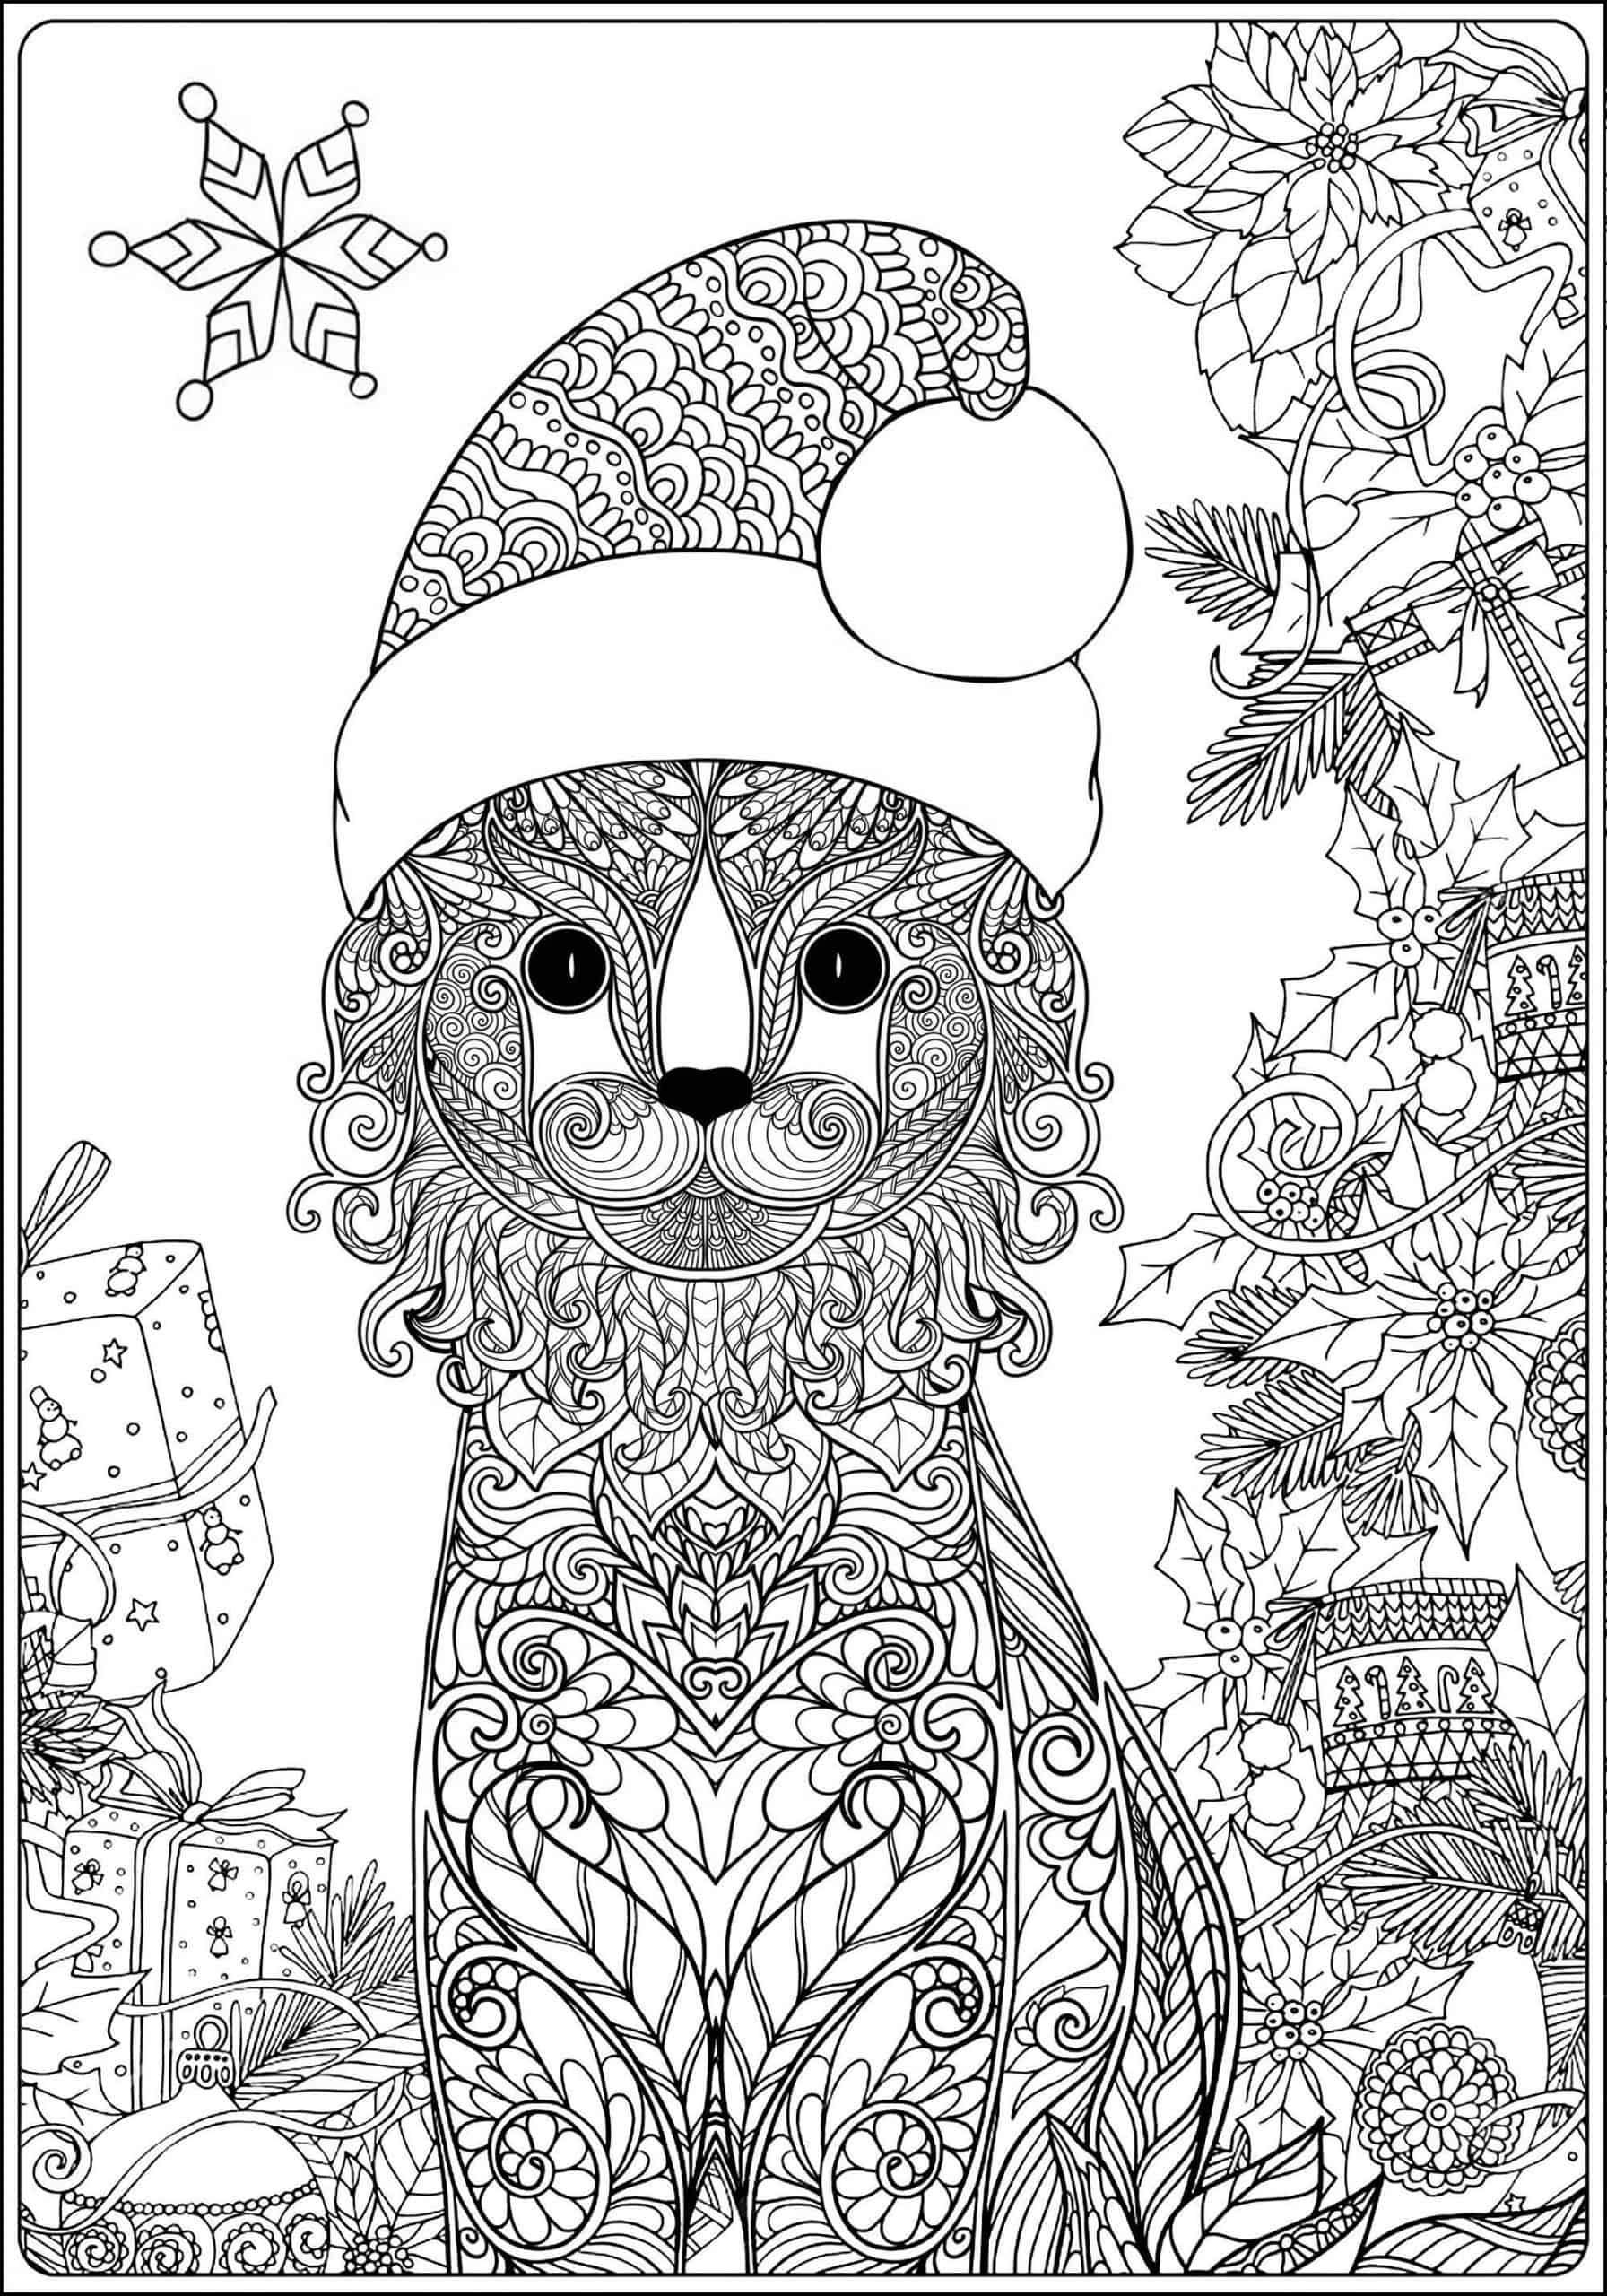 Christmas Coloring Page For Kids And Adults Cute Cat With Scarf